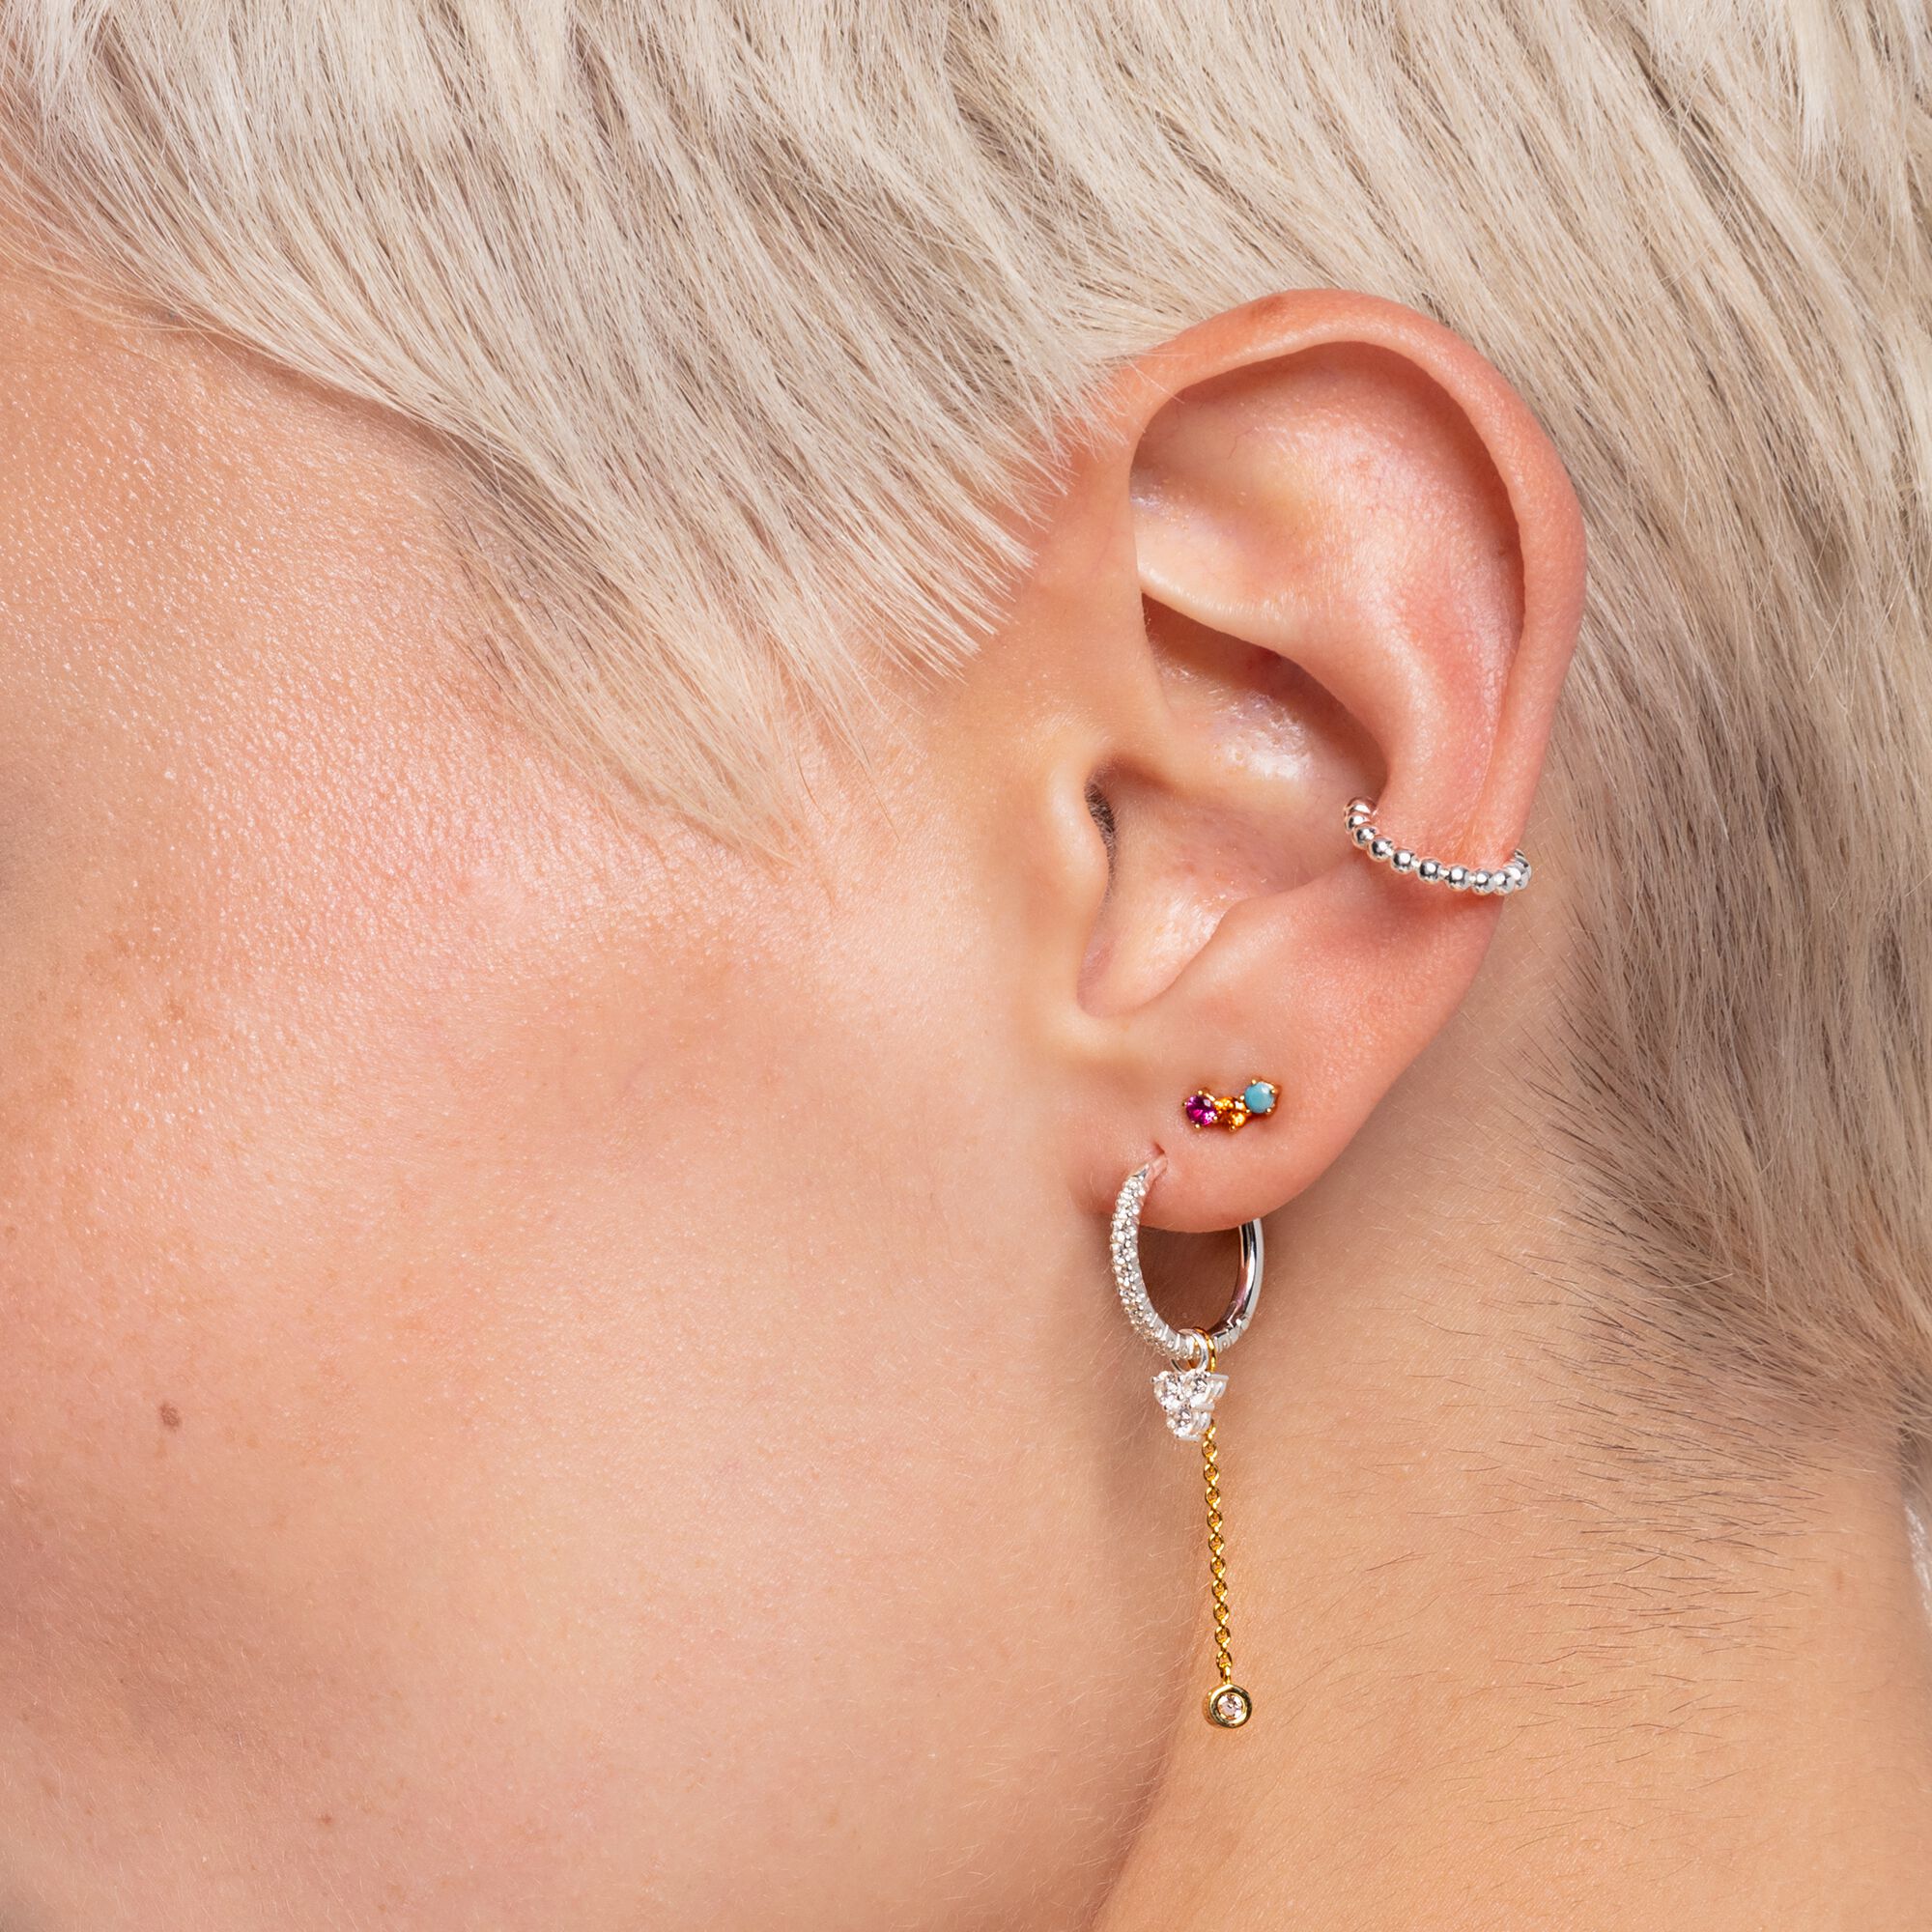 Ear stud gold multi-coloured in THOMAS with │ SABO stones